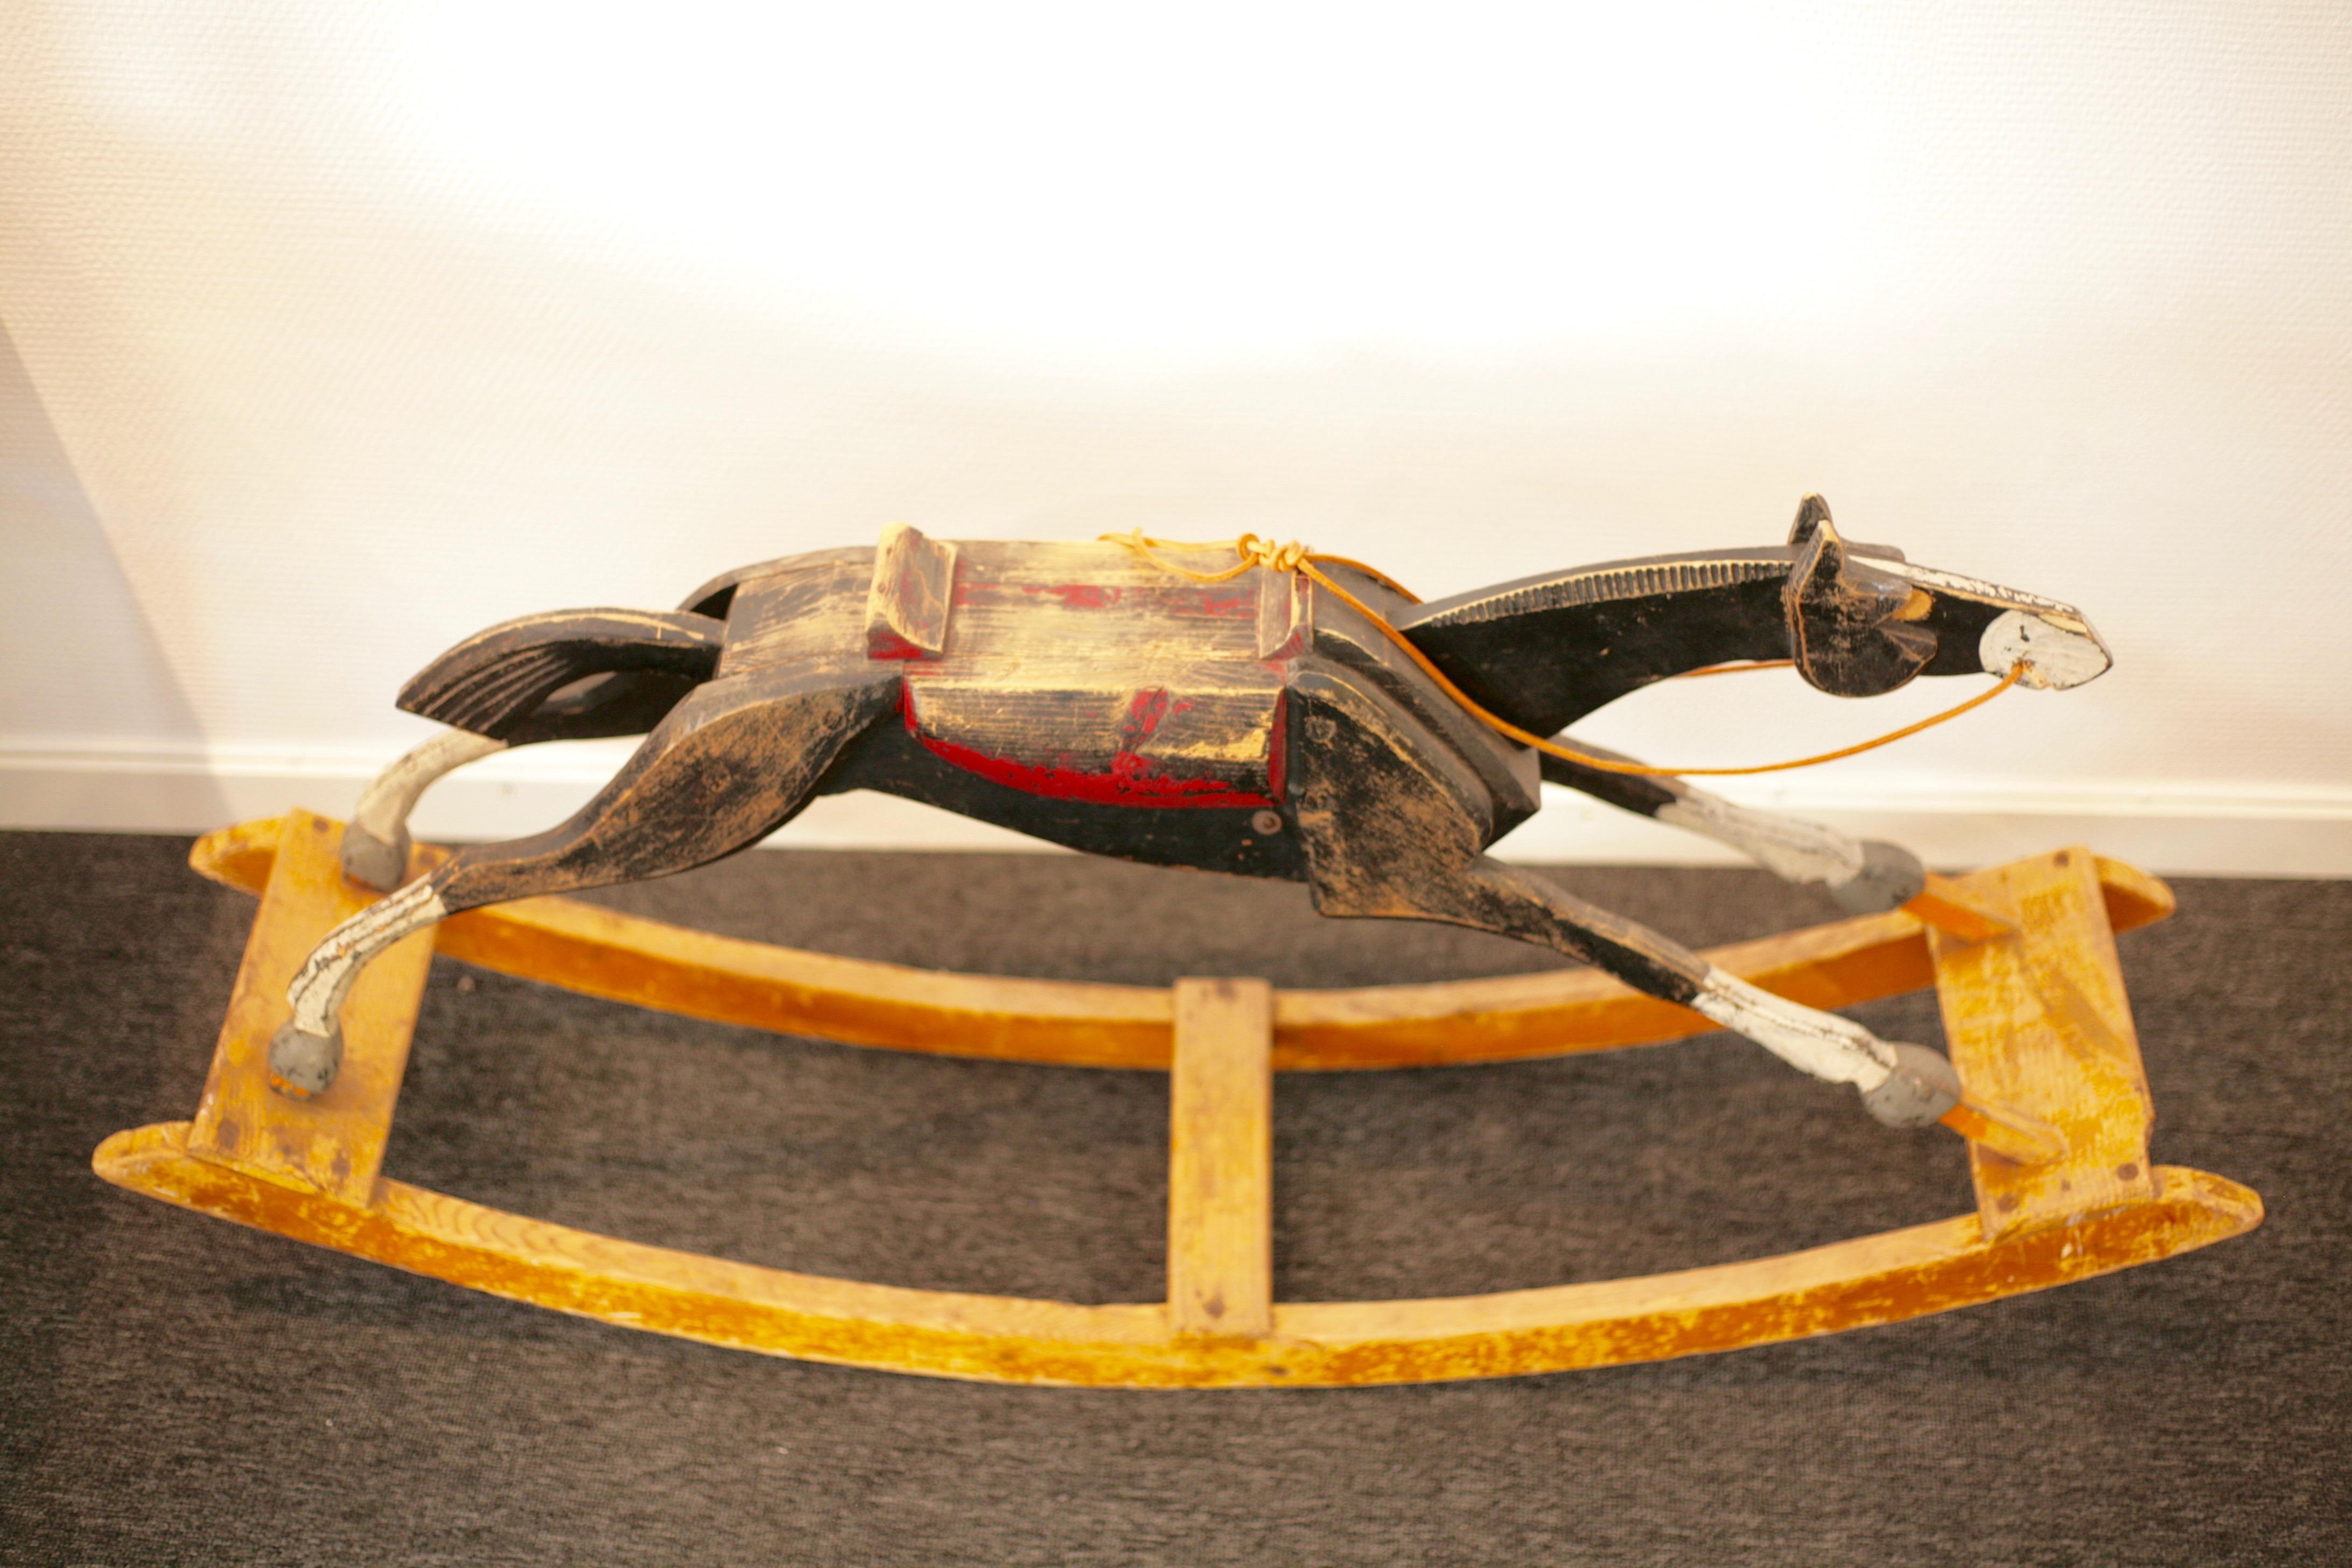 An antique black wooden rocking horse, circa 1900. In good vintage condition. Small chip to one of the front wooden boards. New leather reins.